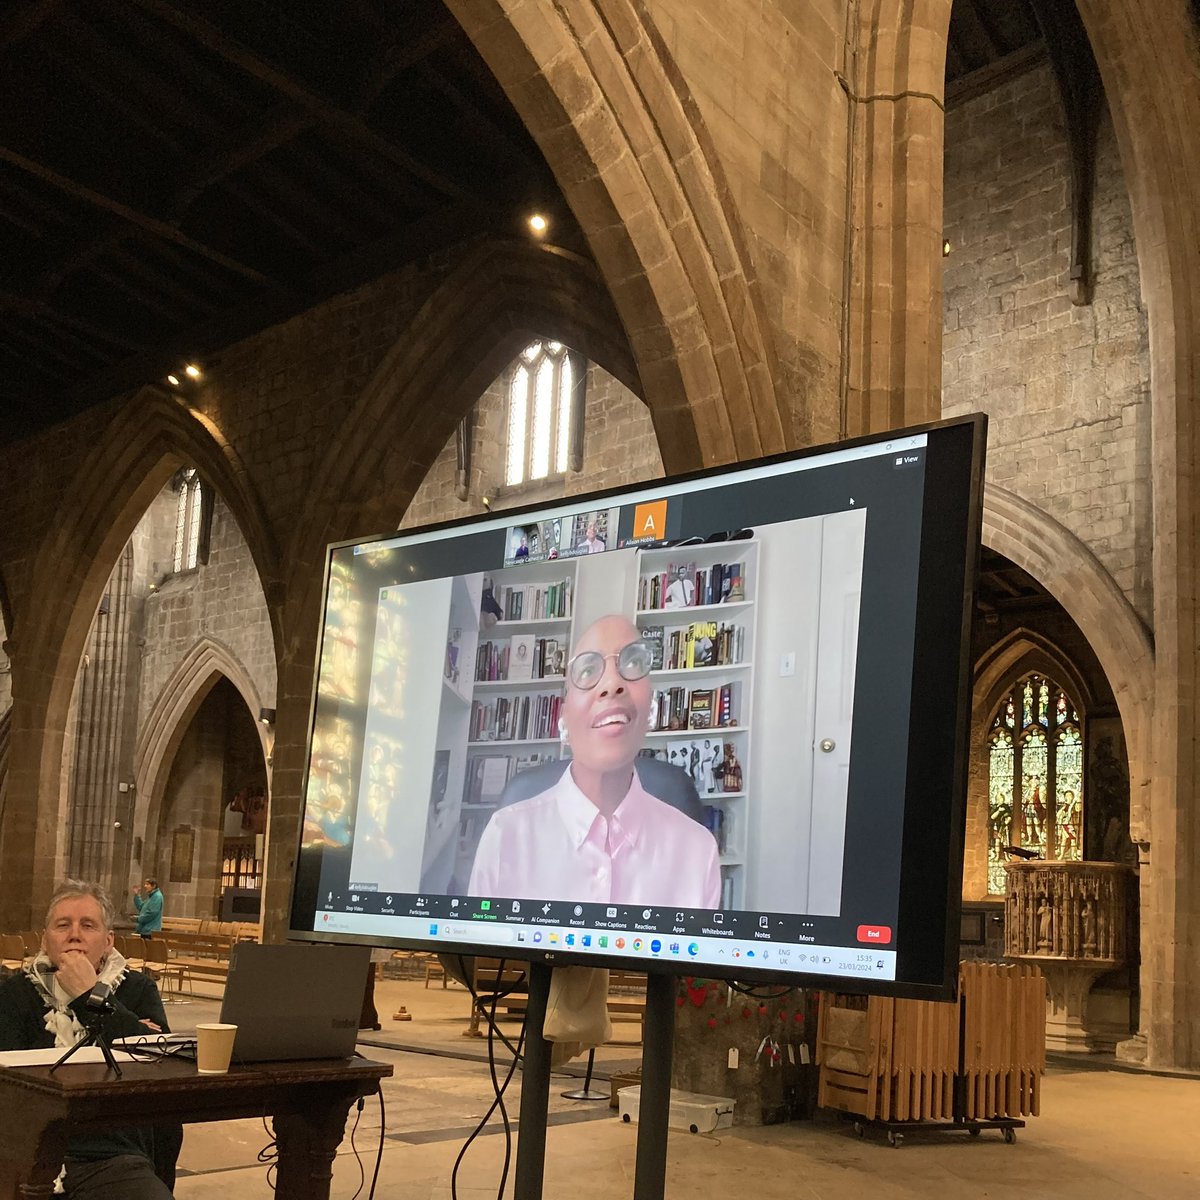 Great to hear (& see) via Zoom @RevDrKBD’s Passiontide reflections on Black Lives Matter in the light of the Cross & Resurrection @nclcathedral. Inspiring, challenging & fun as we begin Holy Week